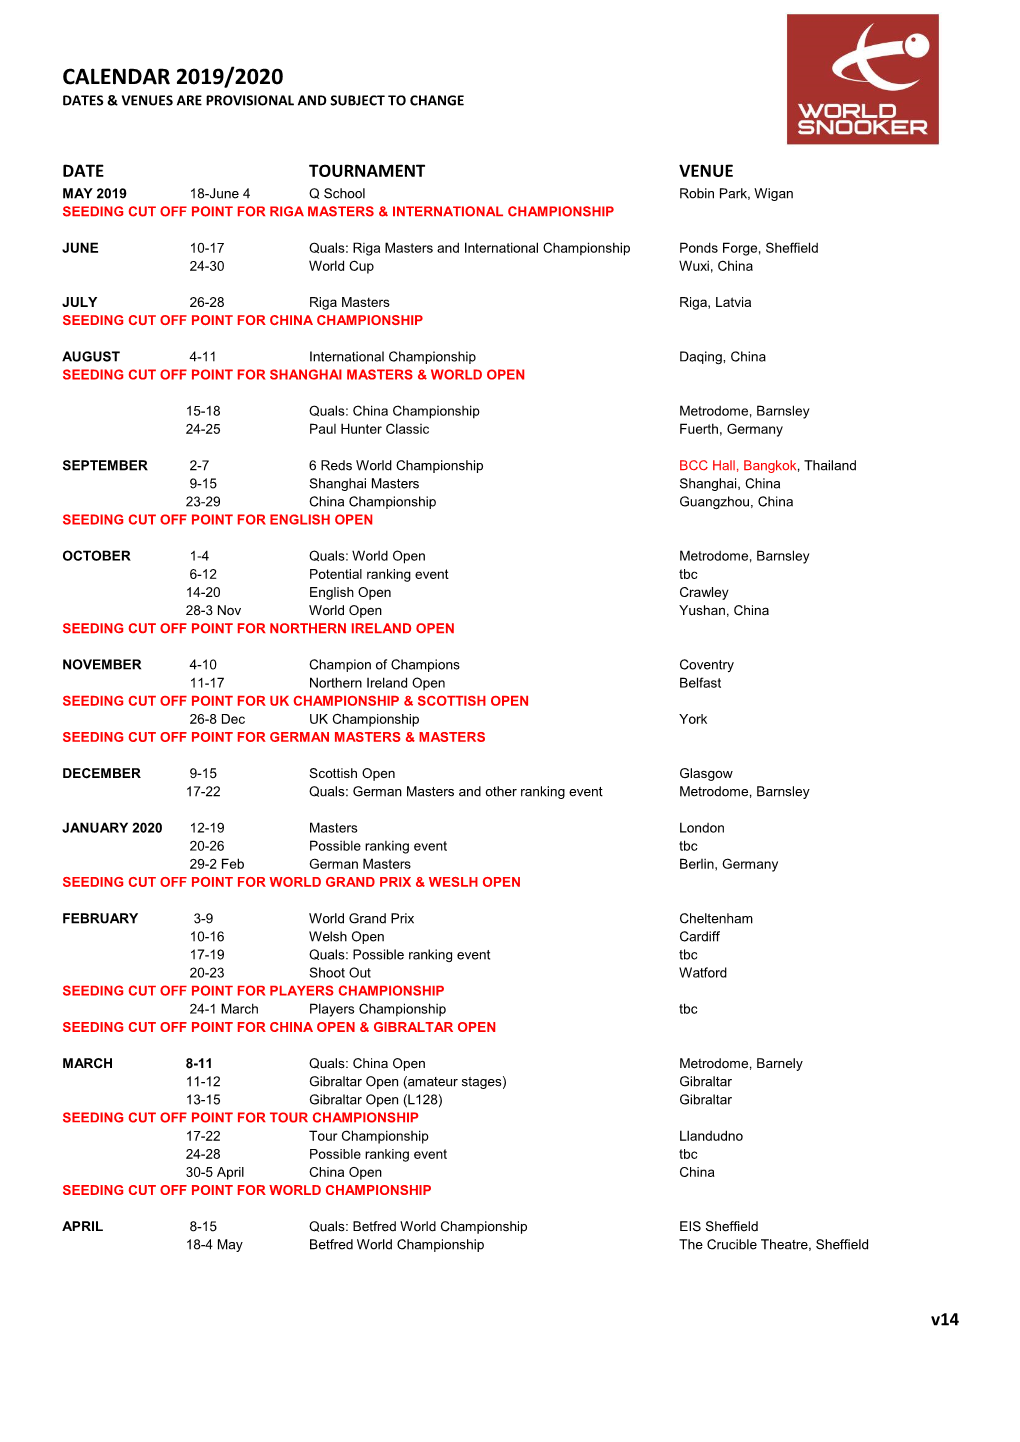 Calendar 2019/2020 Dates & Venues Are Provisional and Subject to Change